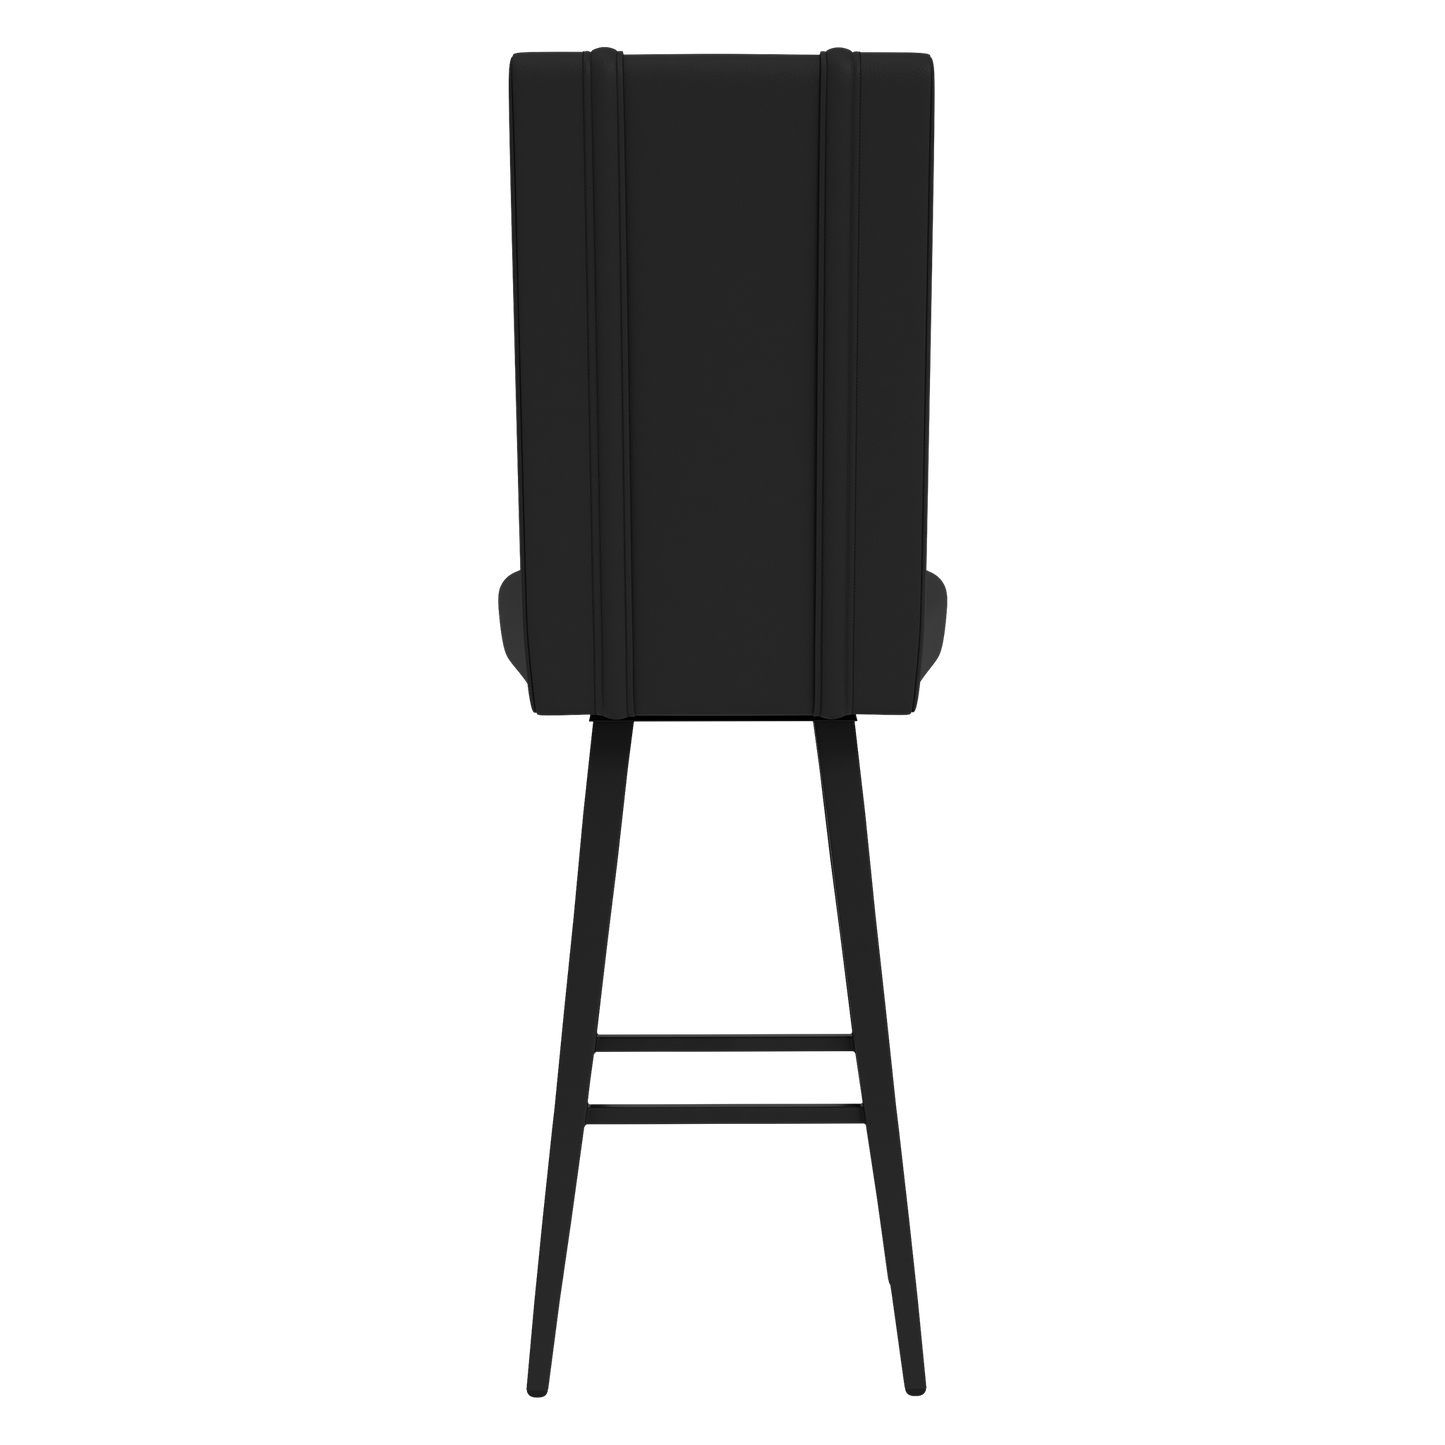 Swivel Bar Stool 2000 with  Indianapolis Colts Helmet Logo